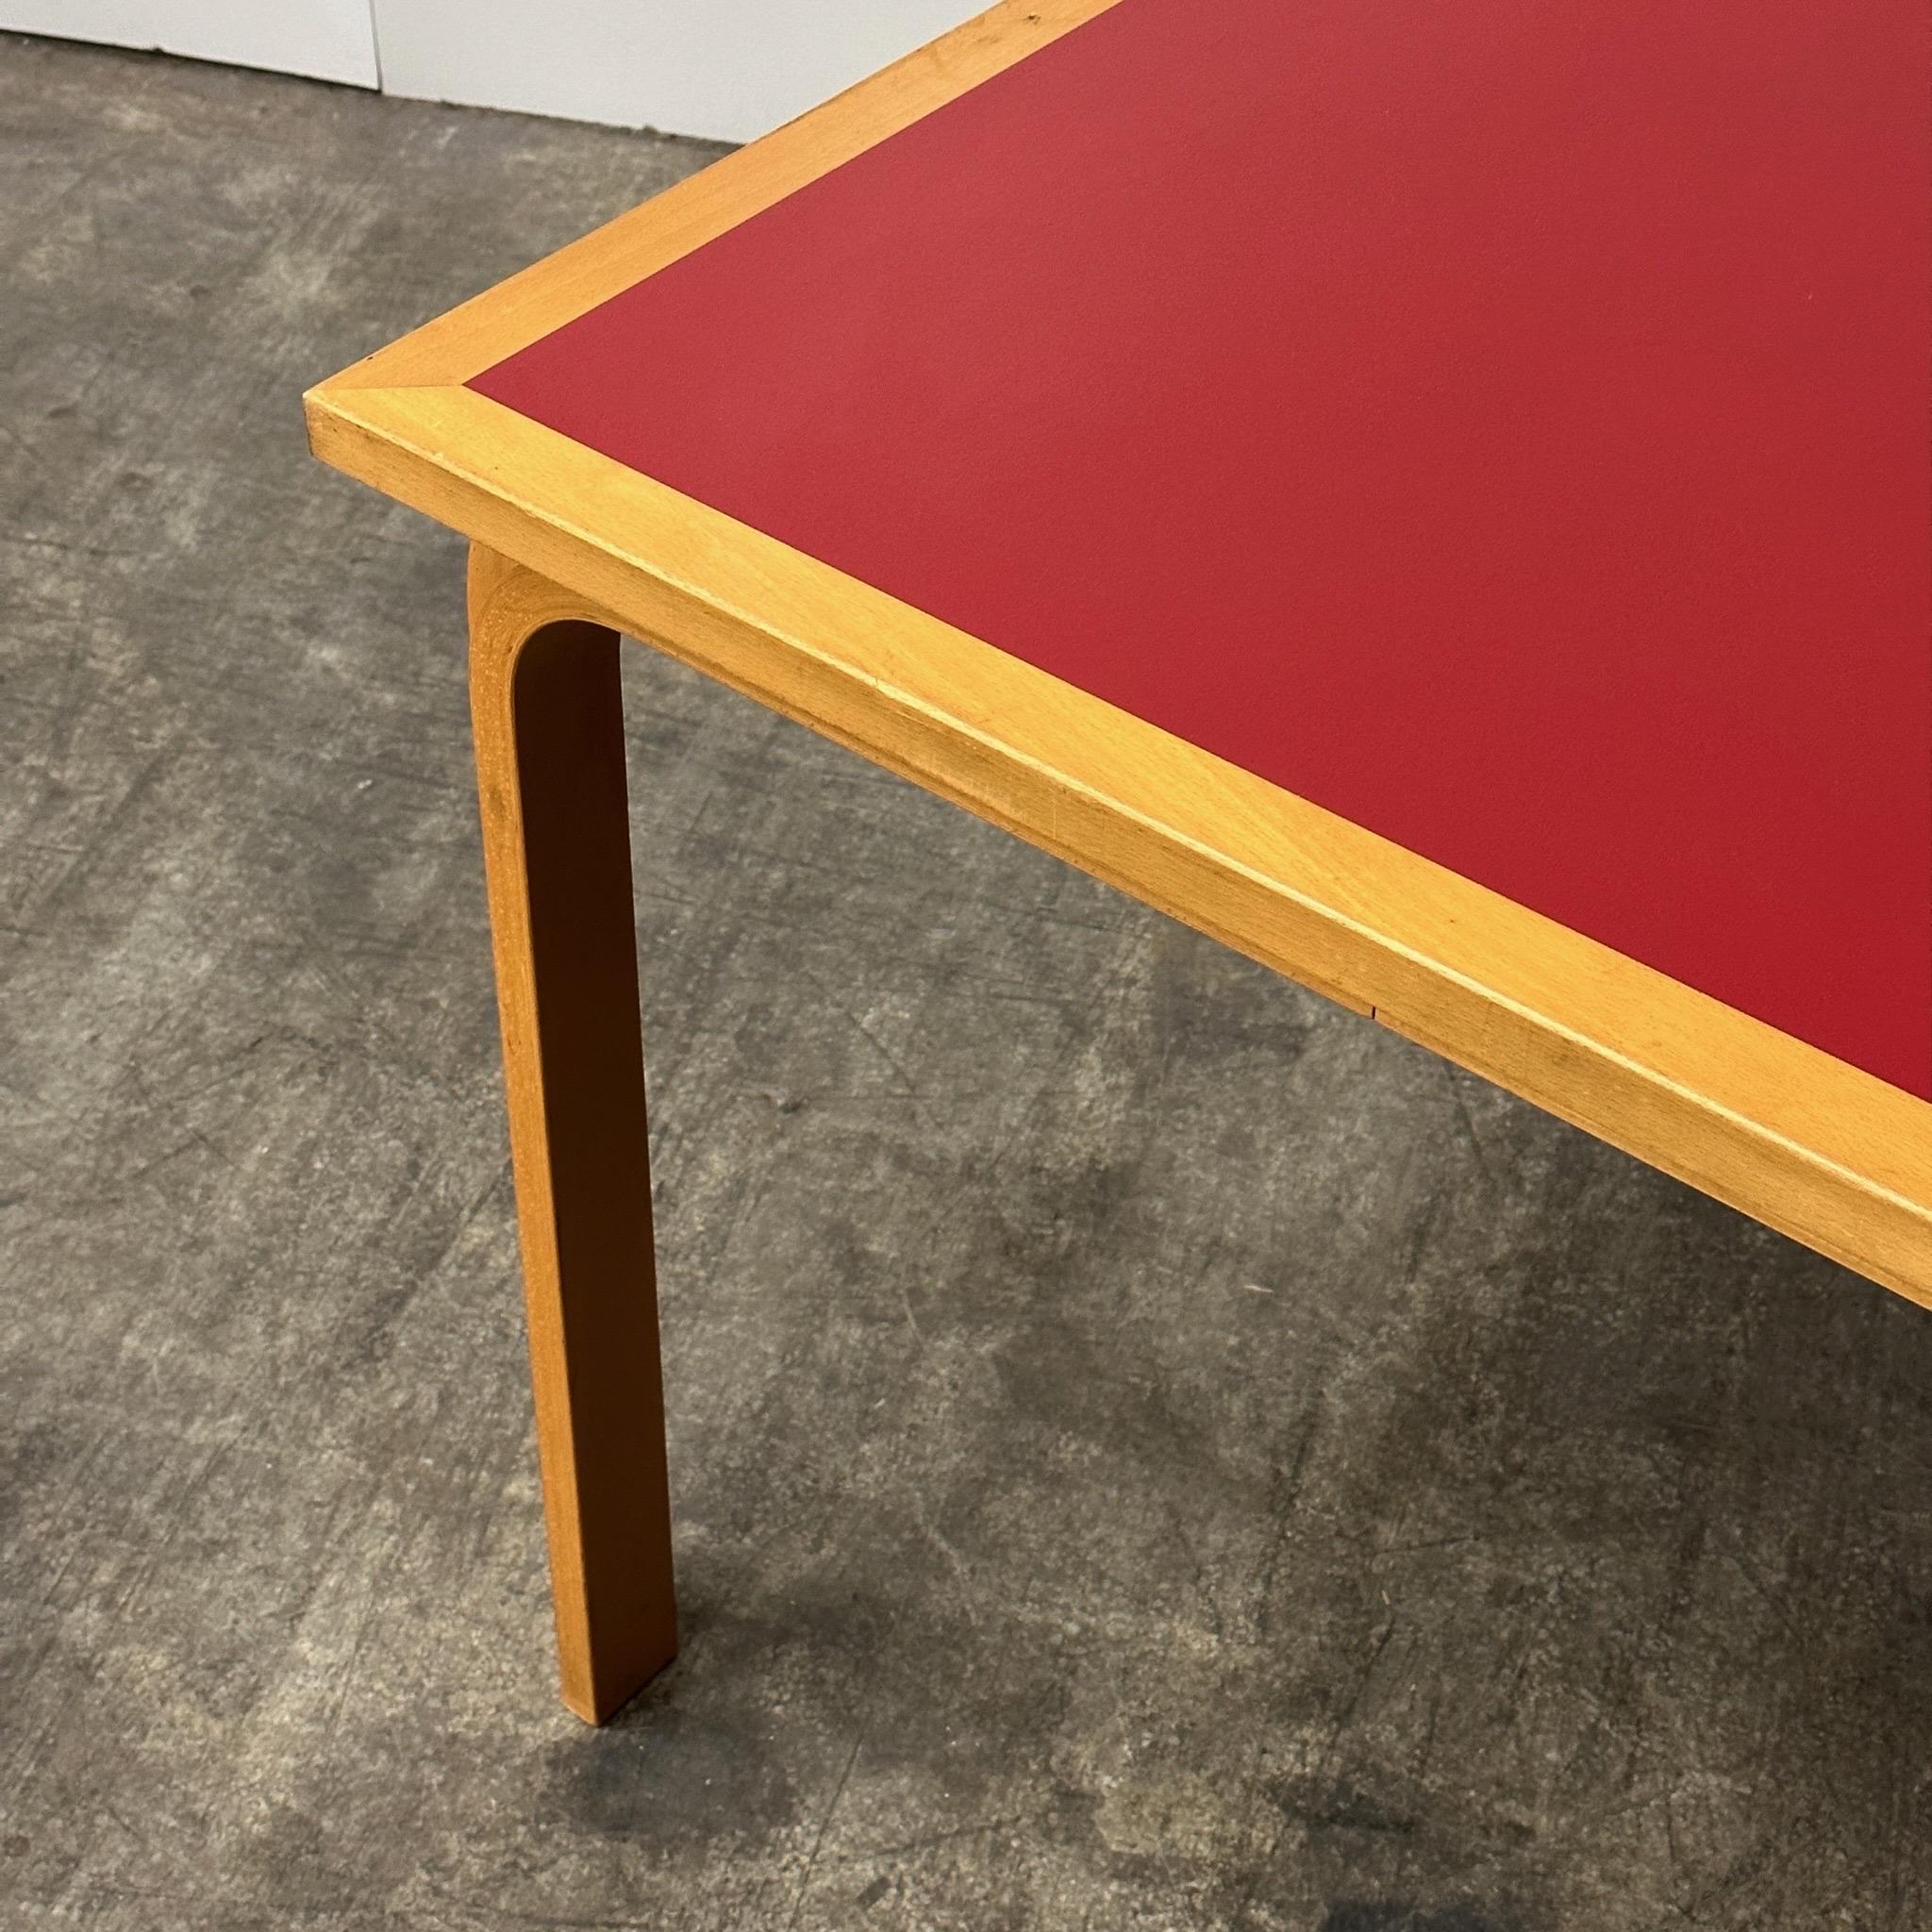 c. 1980s. Bent birch legs and inset Formica top. Multiple available, comes with connectors to join multiple tables together.